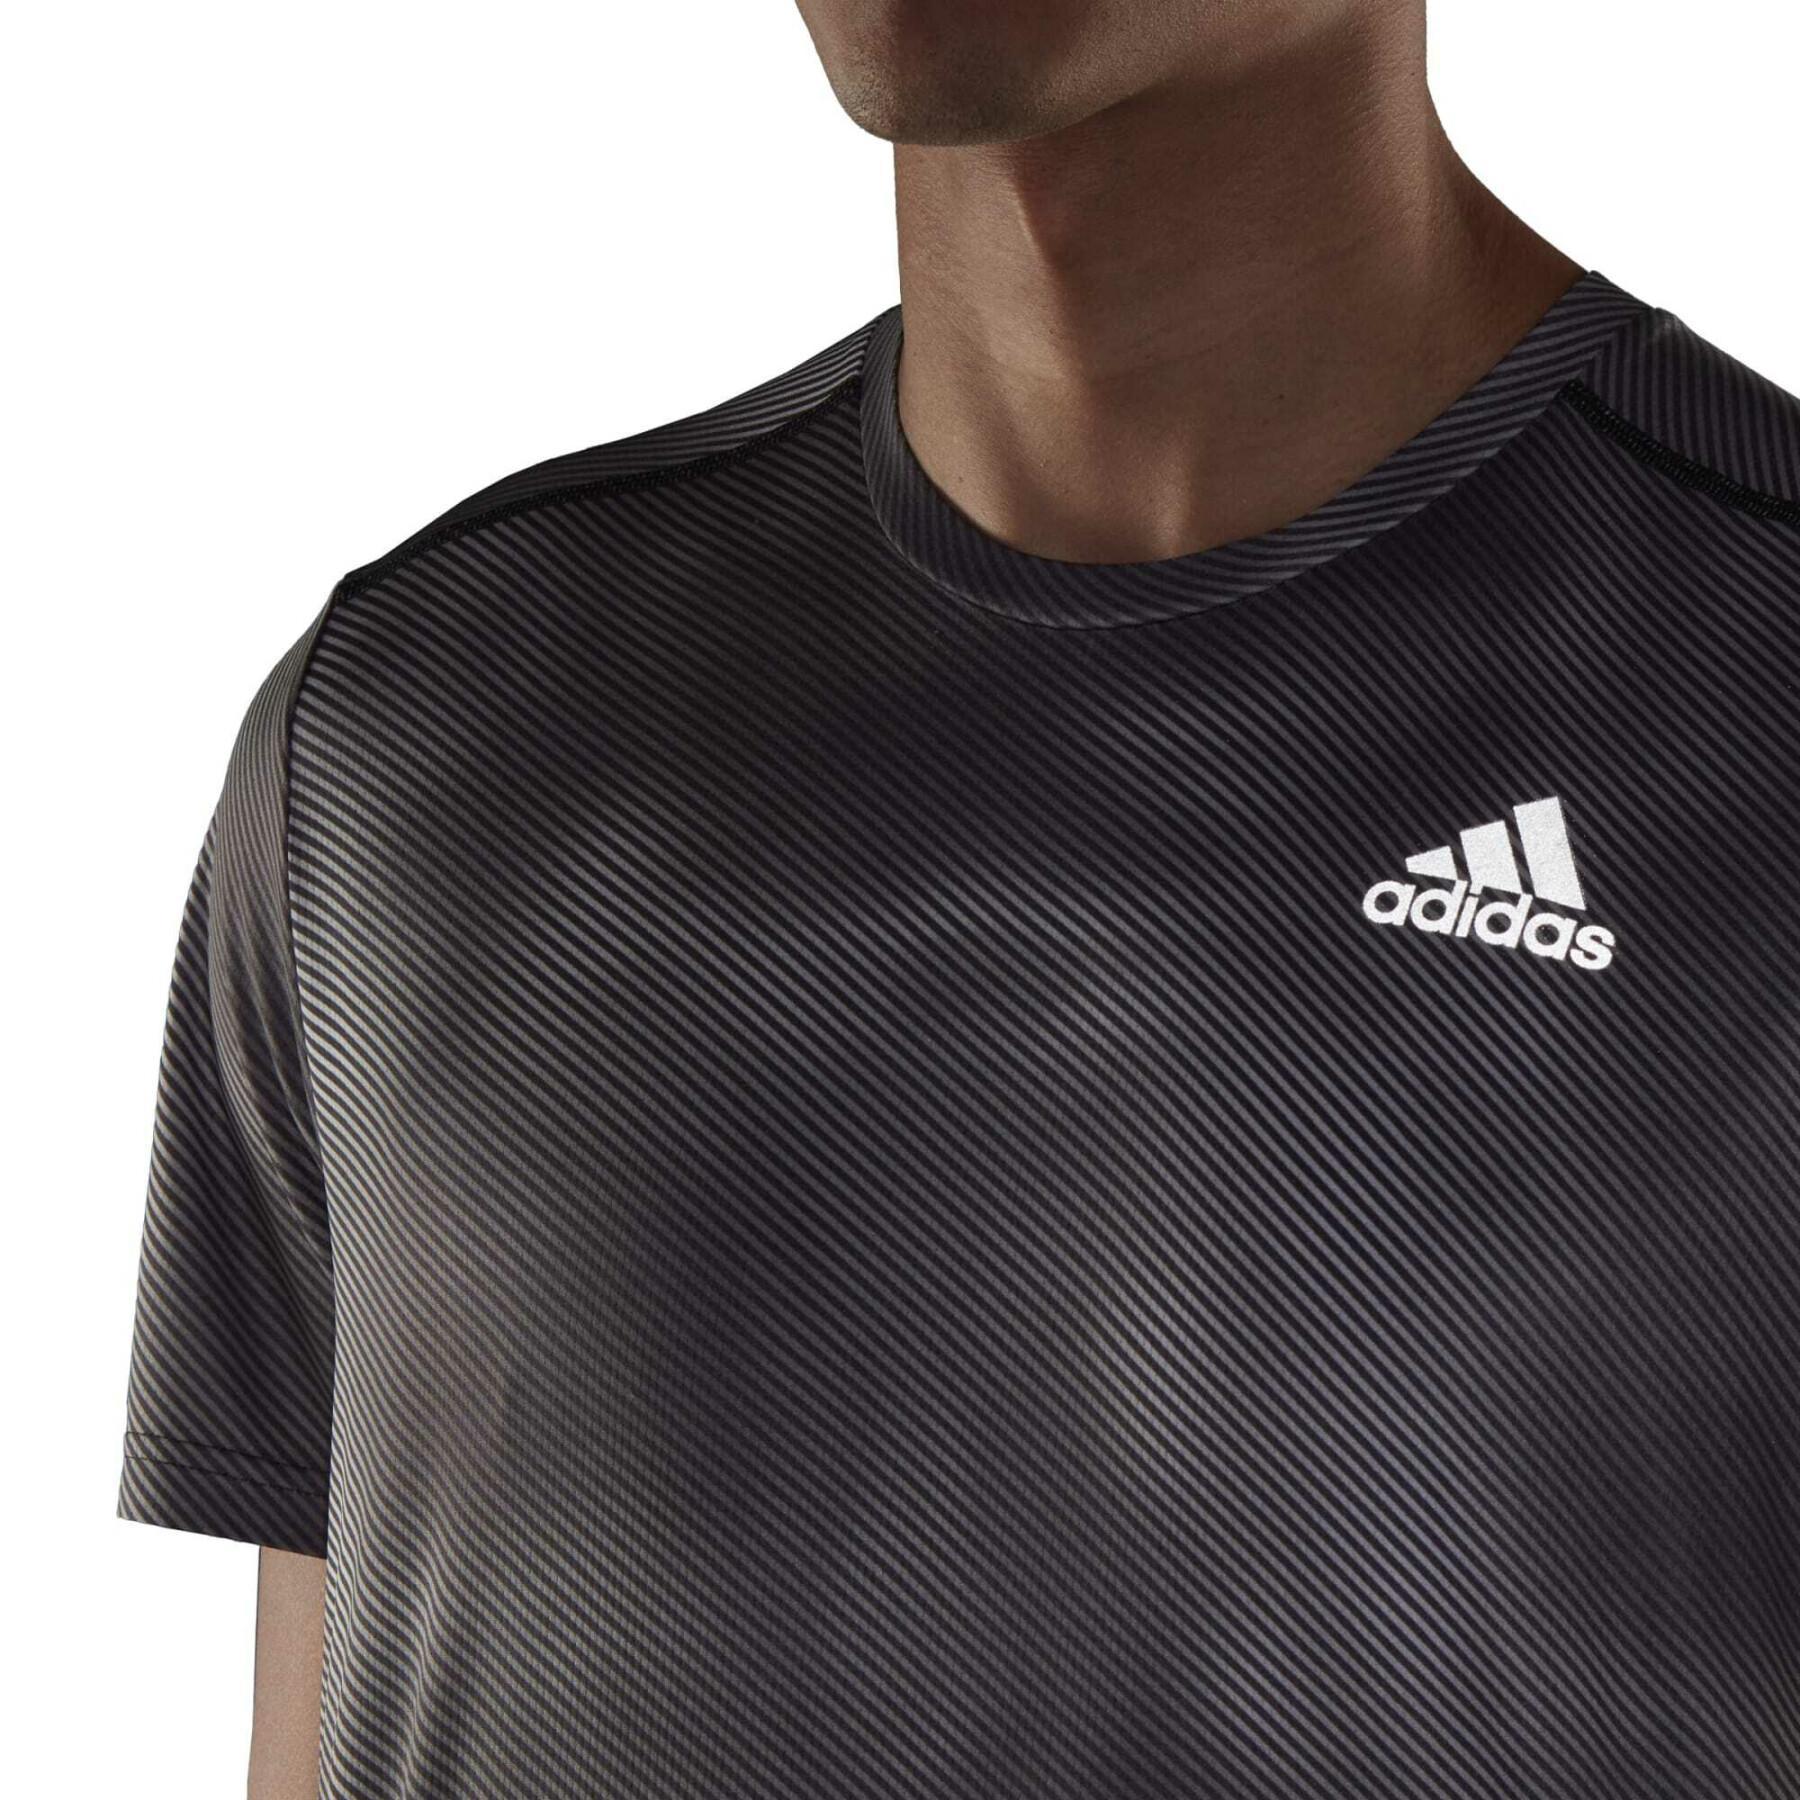 Colorblock jersey adidas Own the Run